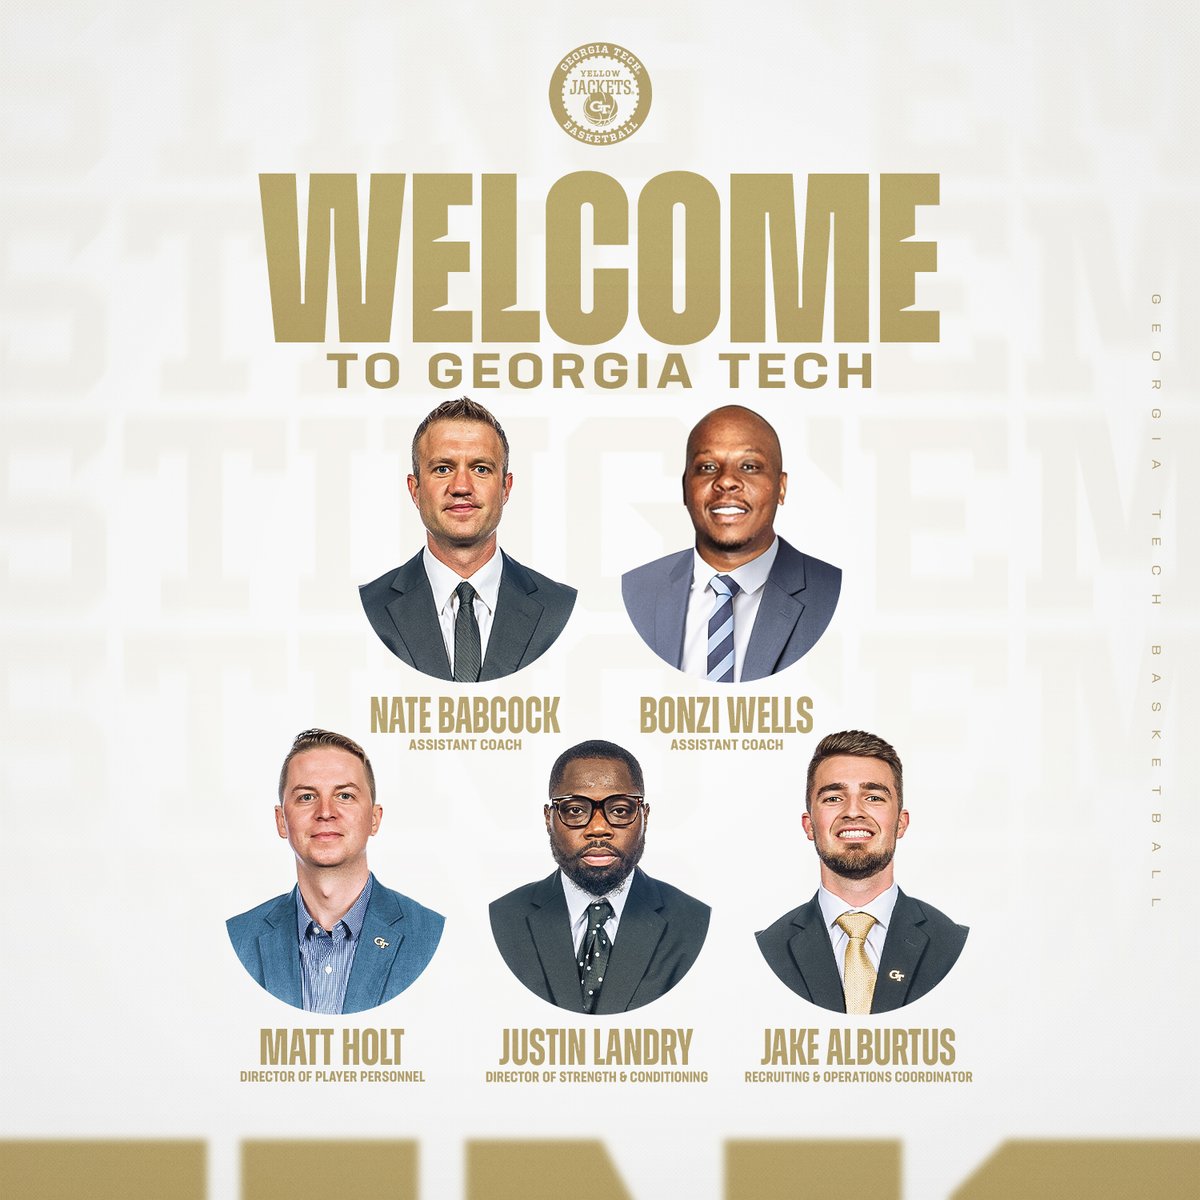 𝐑𝐨𝐮𝐧𝐝𝐢𝐧𝐠 𝐨𝐮𝐭 𝐭𝐡𝐞 𝐬𝐭𝐚𝐟𝐟. 💪 Join us in welcoming five new Jackets to The Flats! 🔗: buzz.gt/mbbstaff2324 #StingEm 🐝